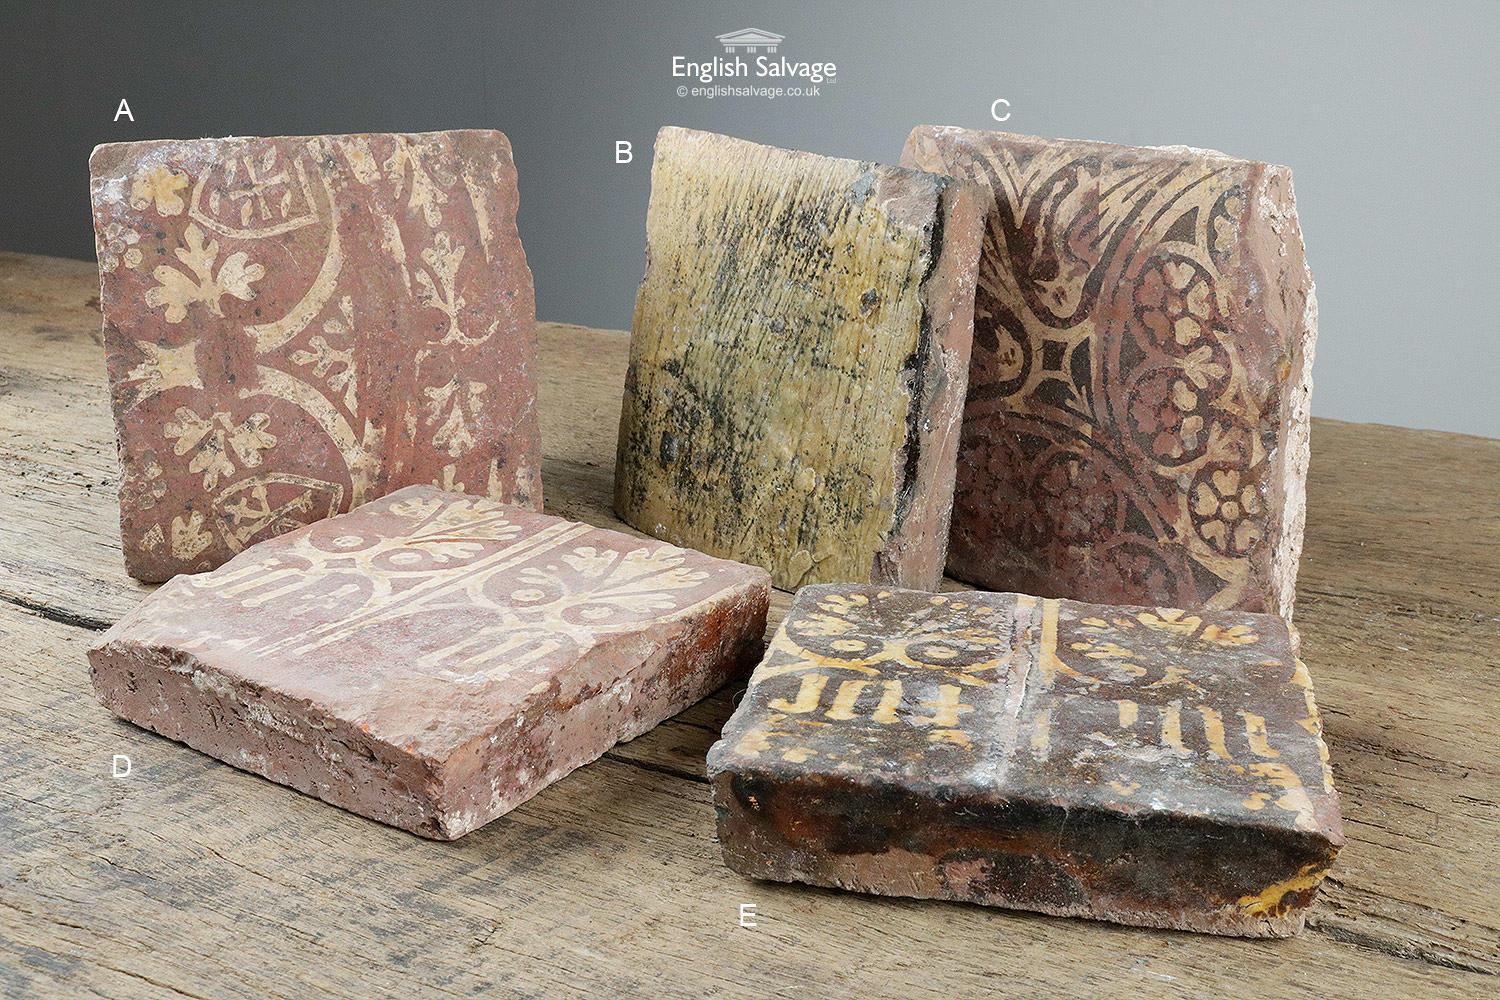 Very old and extremely rare medieval encaustic tiles dating from 14th-16th century. Identical to ones found in Great Malvern Priory. Five floral / patterned and one plain (this one is priced at £60). Measurements vary from 13/13.5cm square x 2.8cm